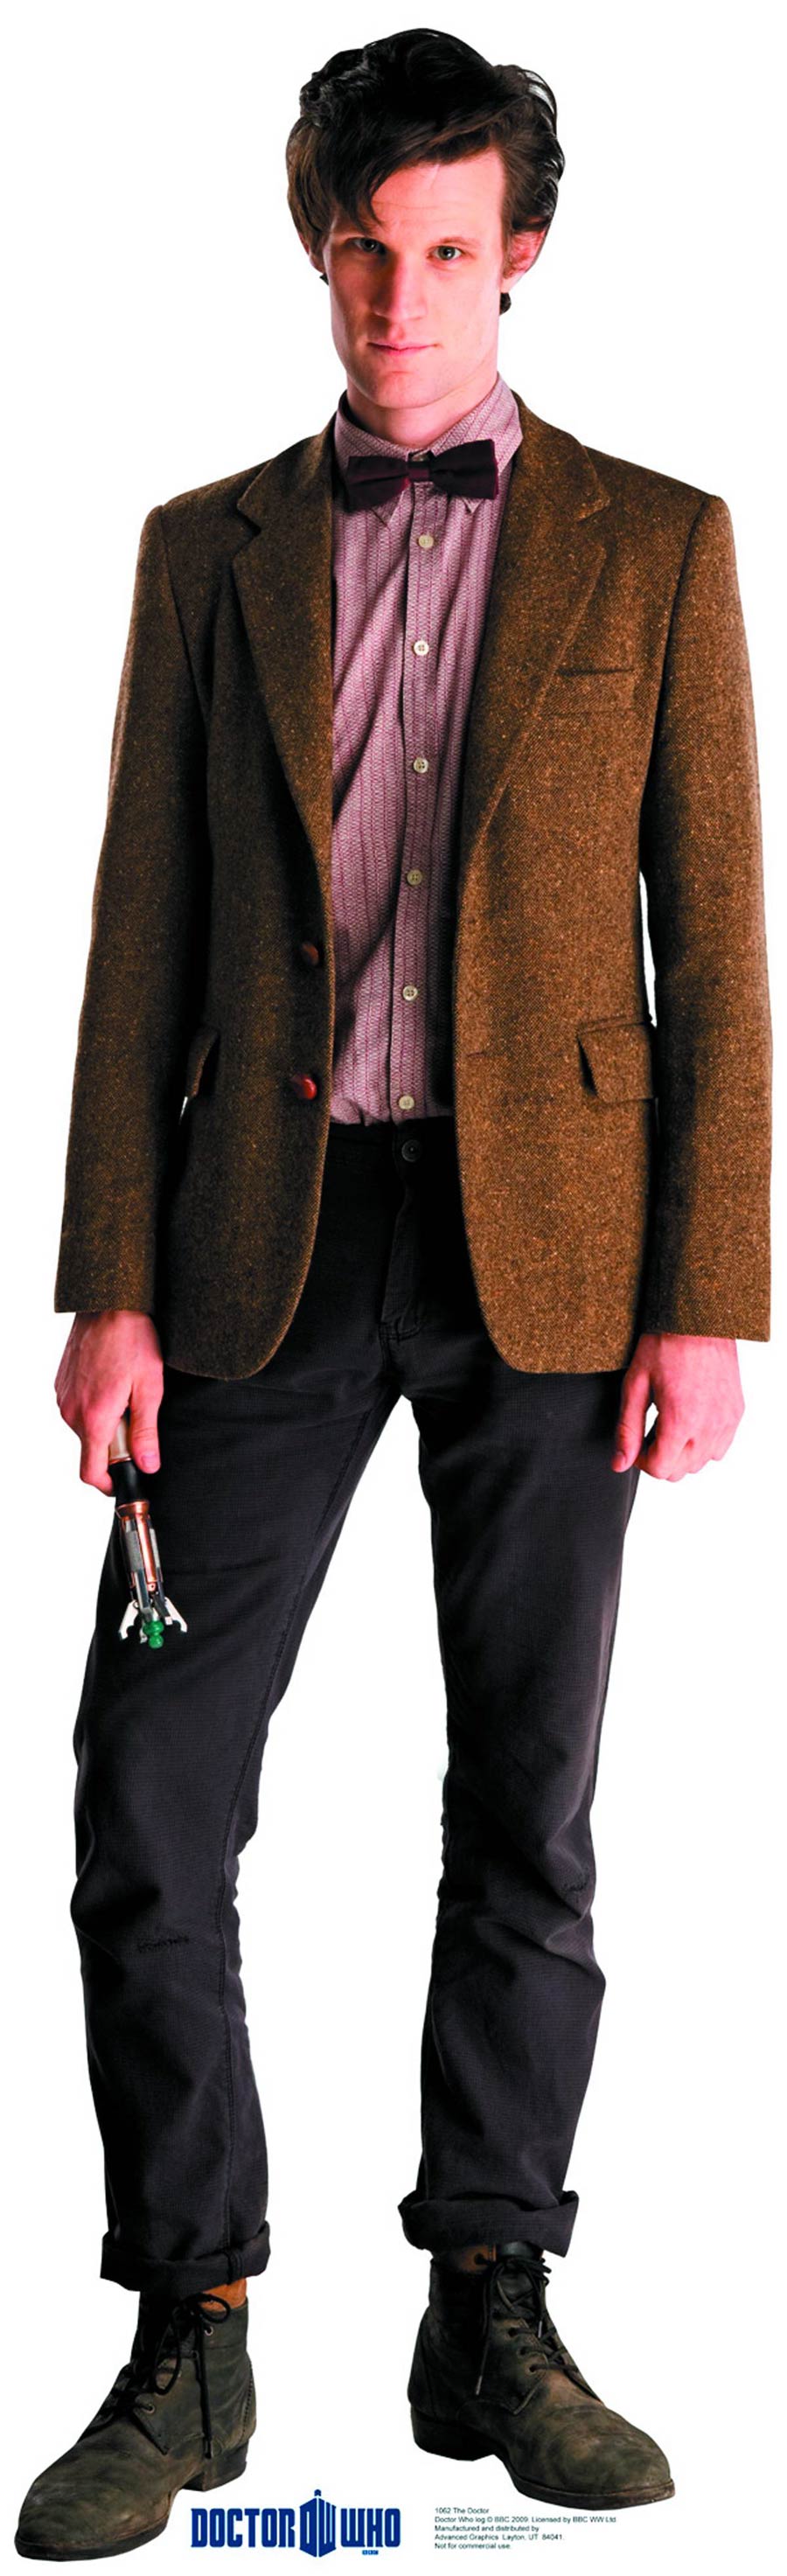 Doctor Who Life-Size Standup - Eleventh Doctor 2